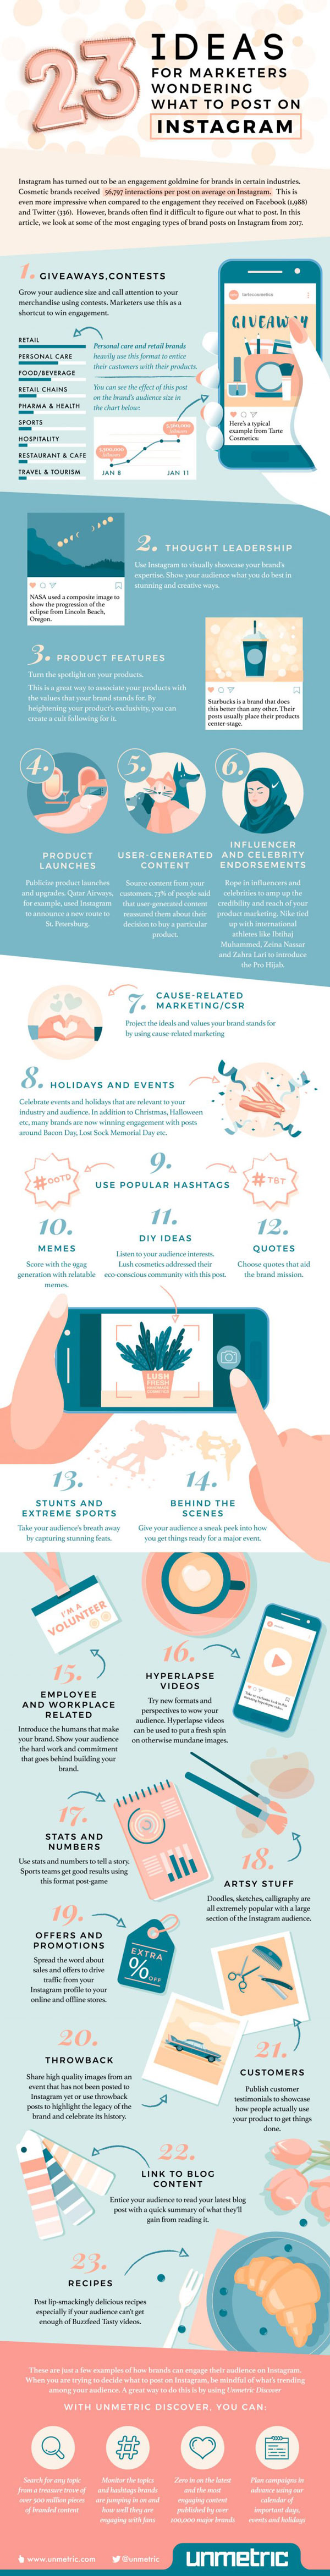 23 Instagram Post Ideas for Businesses - Best Infographics